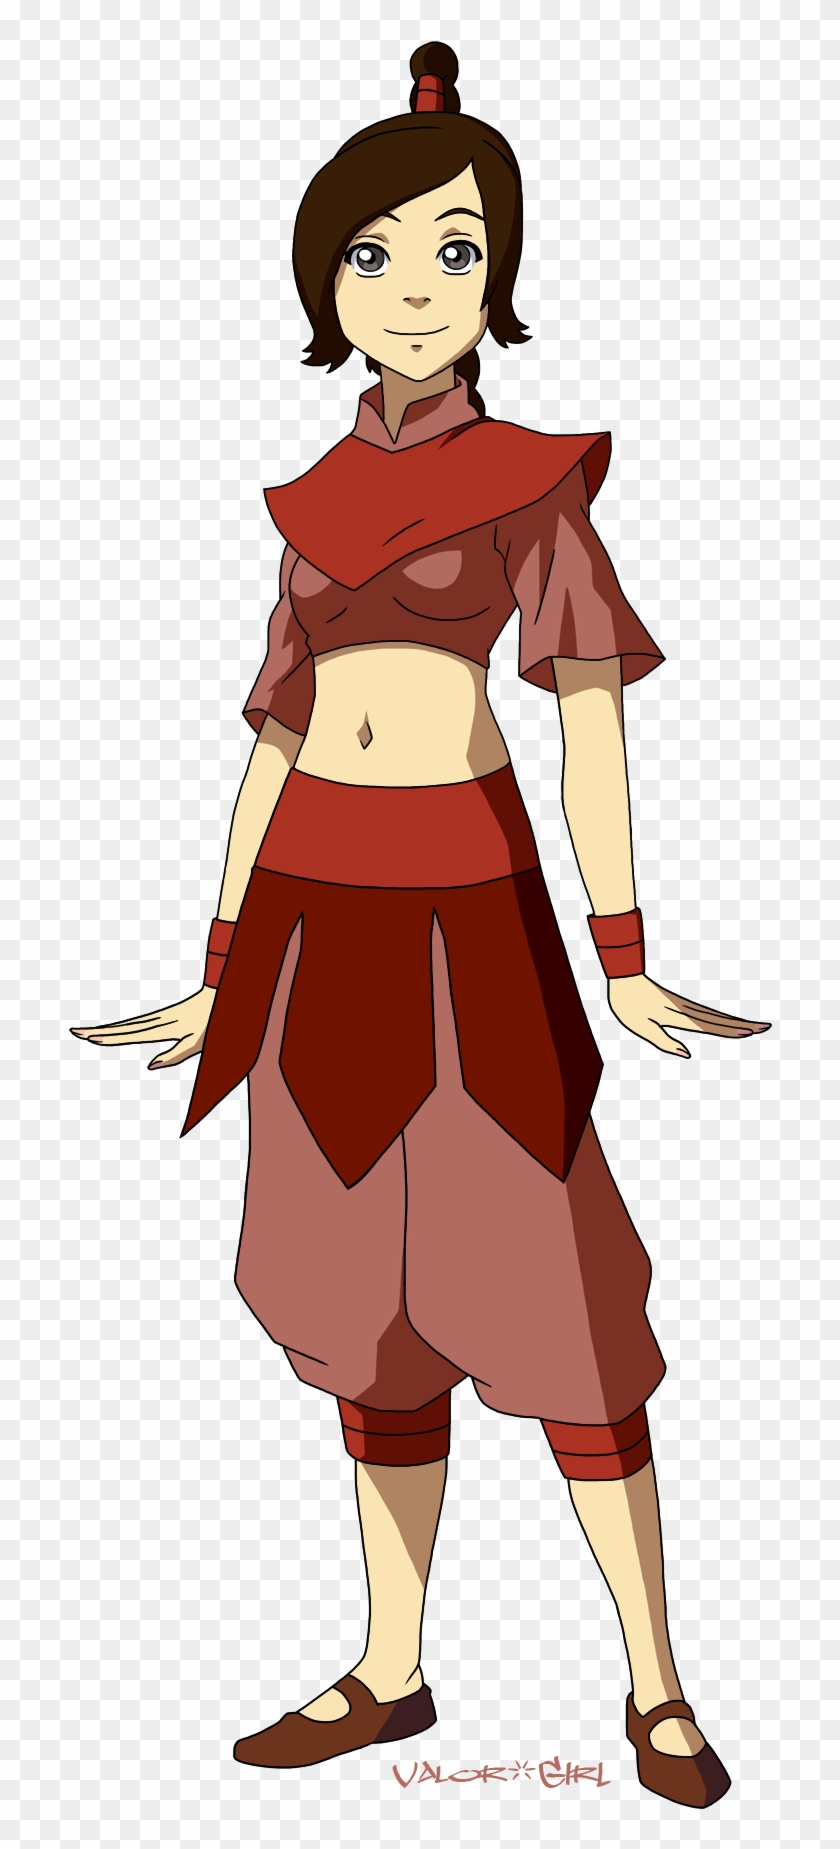 Ty Lee By Valor-girl - Avatar The Last Airbender Tylee #369774